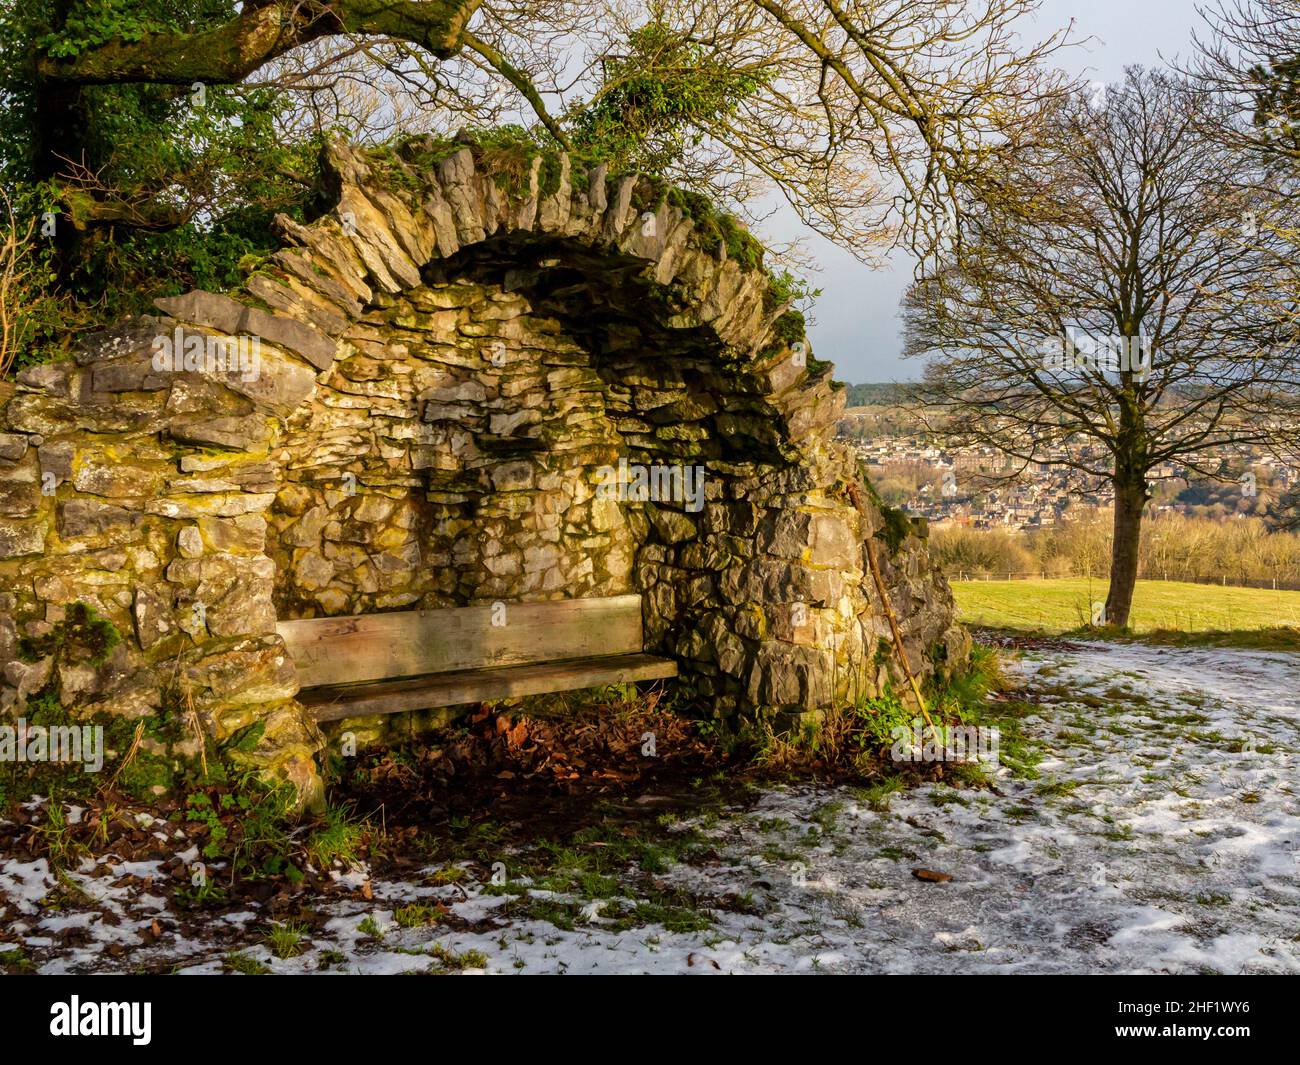 Snow covered landscape with trees at High Tor in Matlock Bath in the Derbyshire Peak District England UK with stone shelter and seat in foreground. Stock Photo